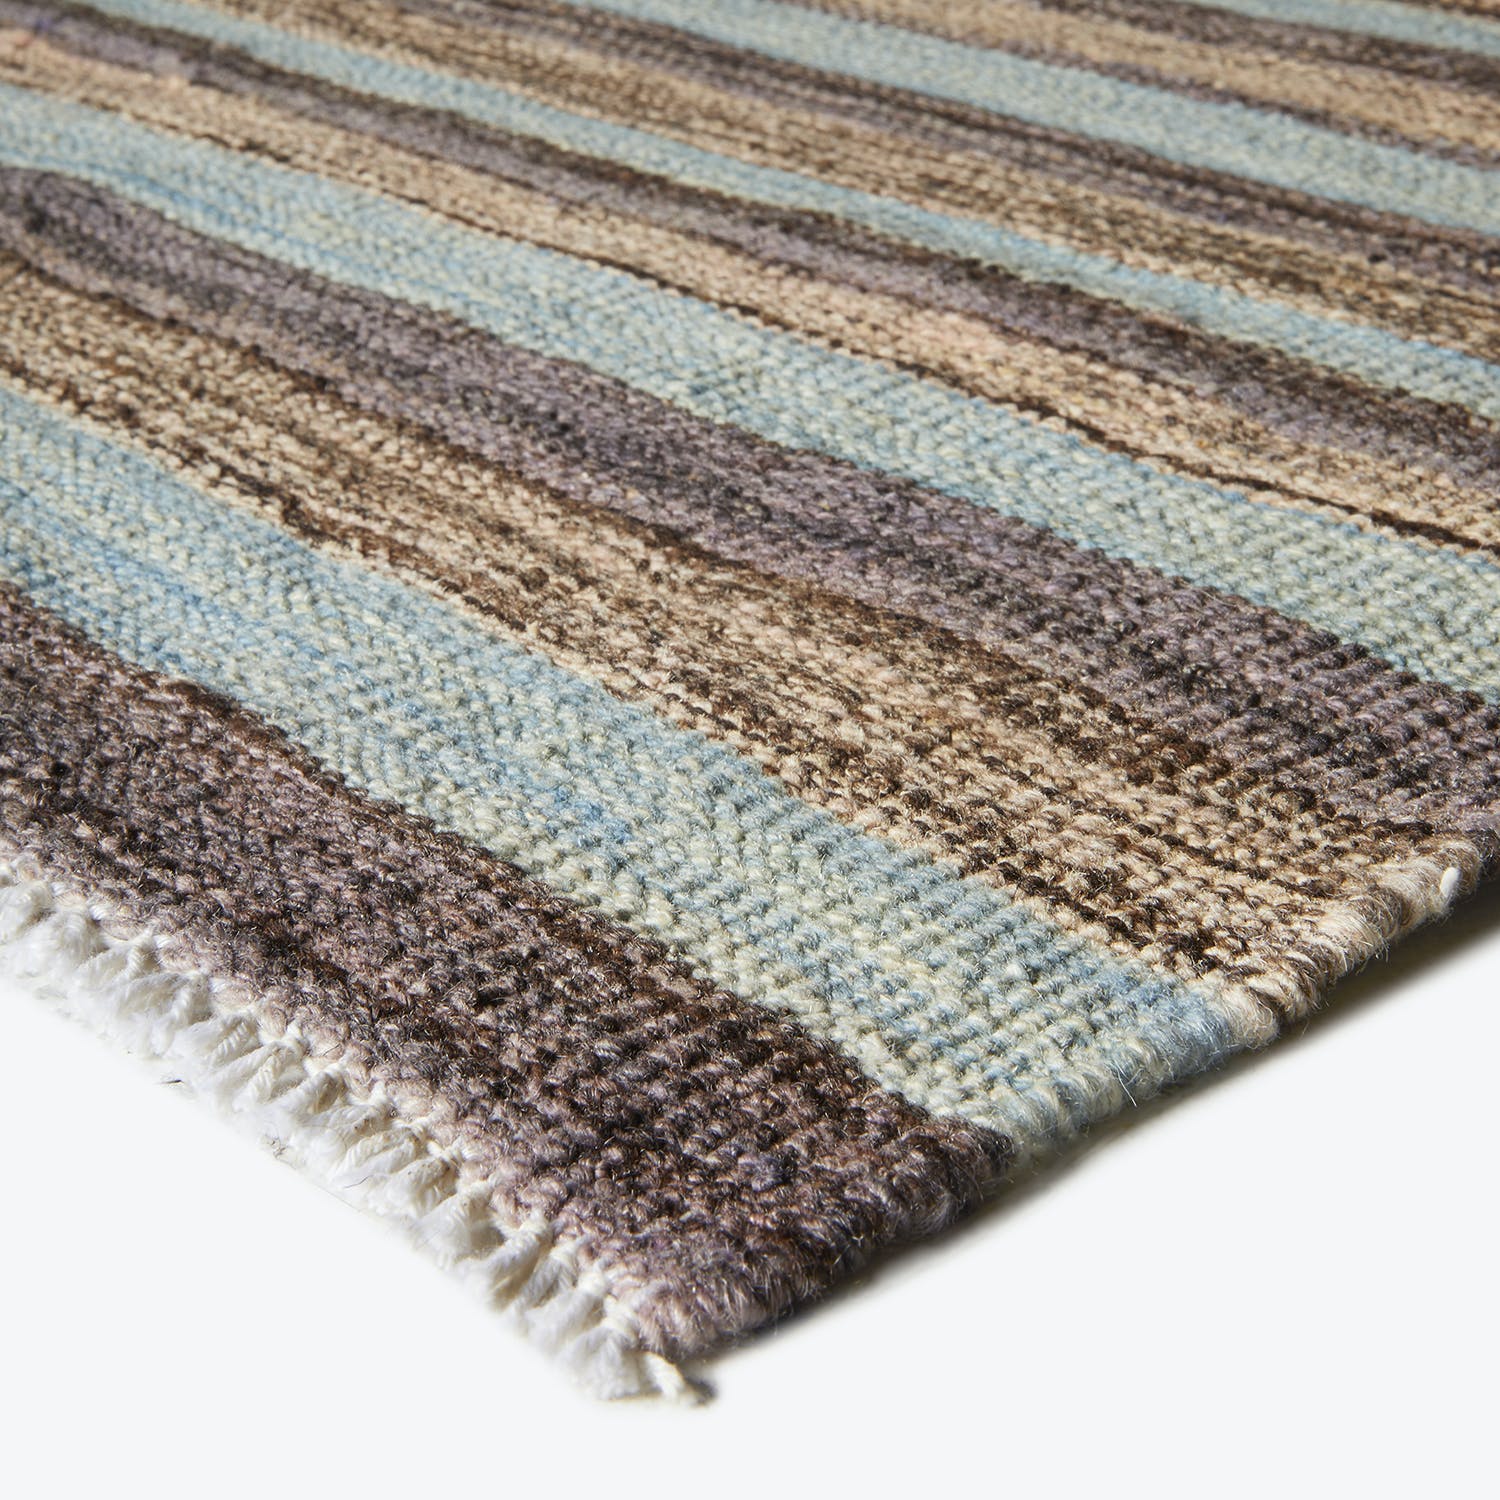 Close-up of a plush striped rug with soft, thick texture.